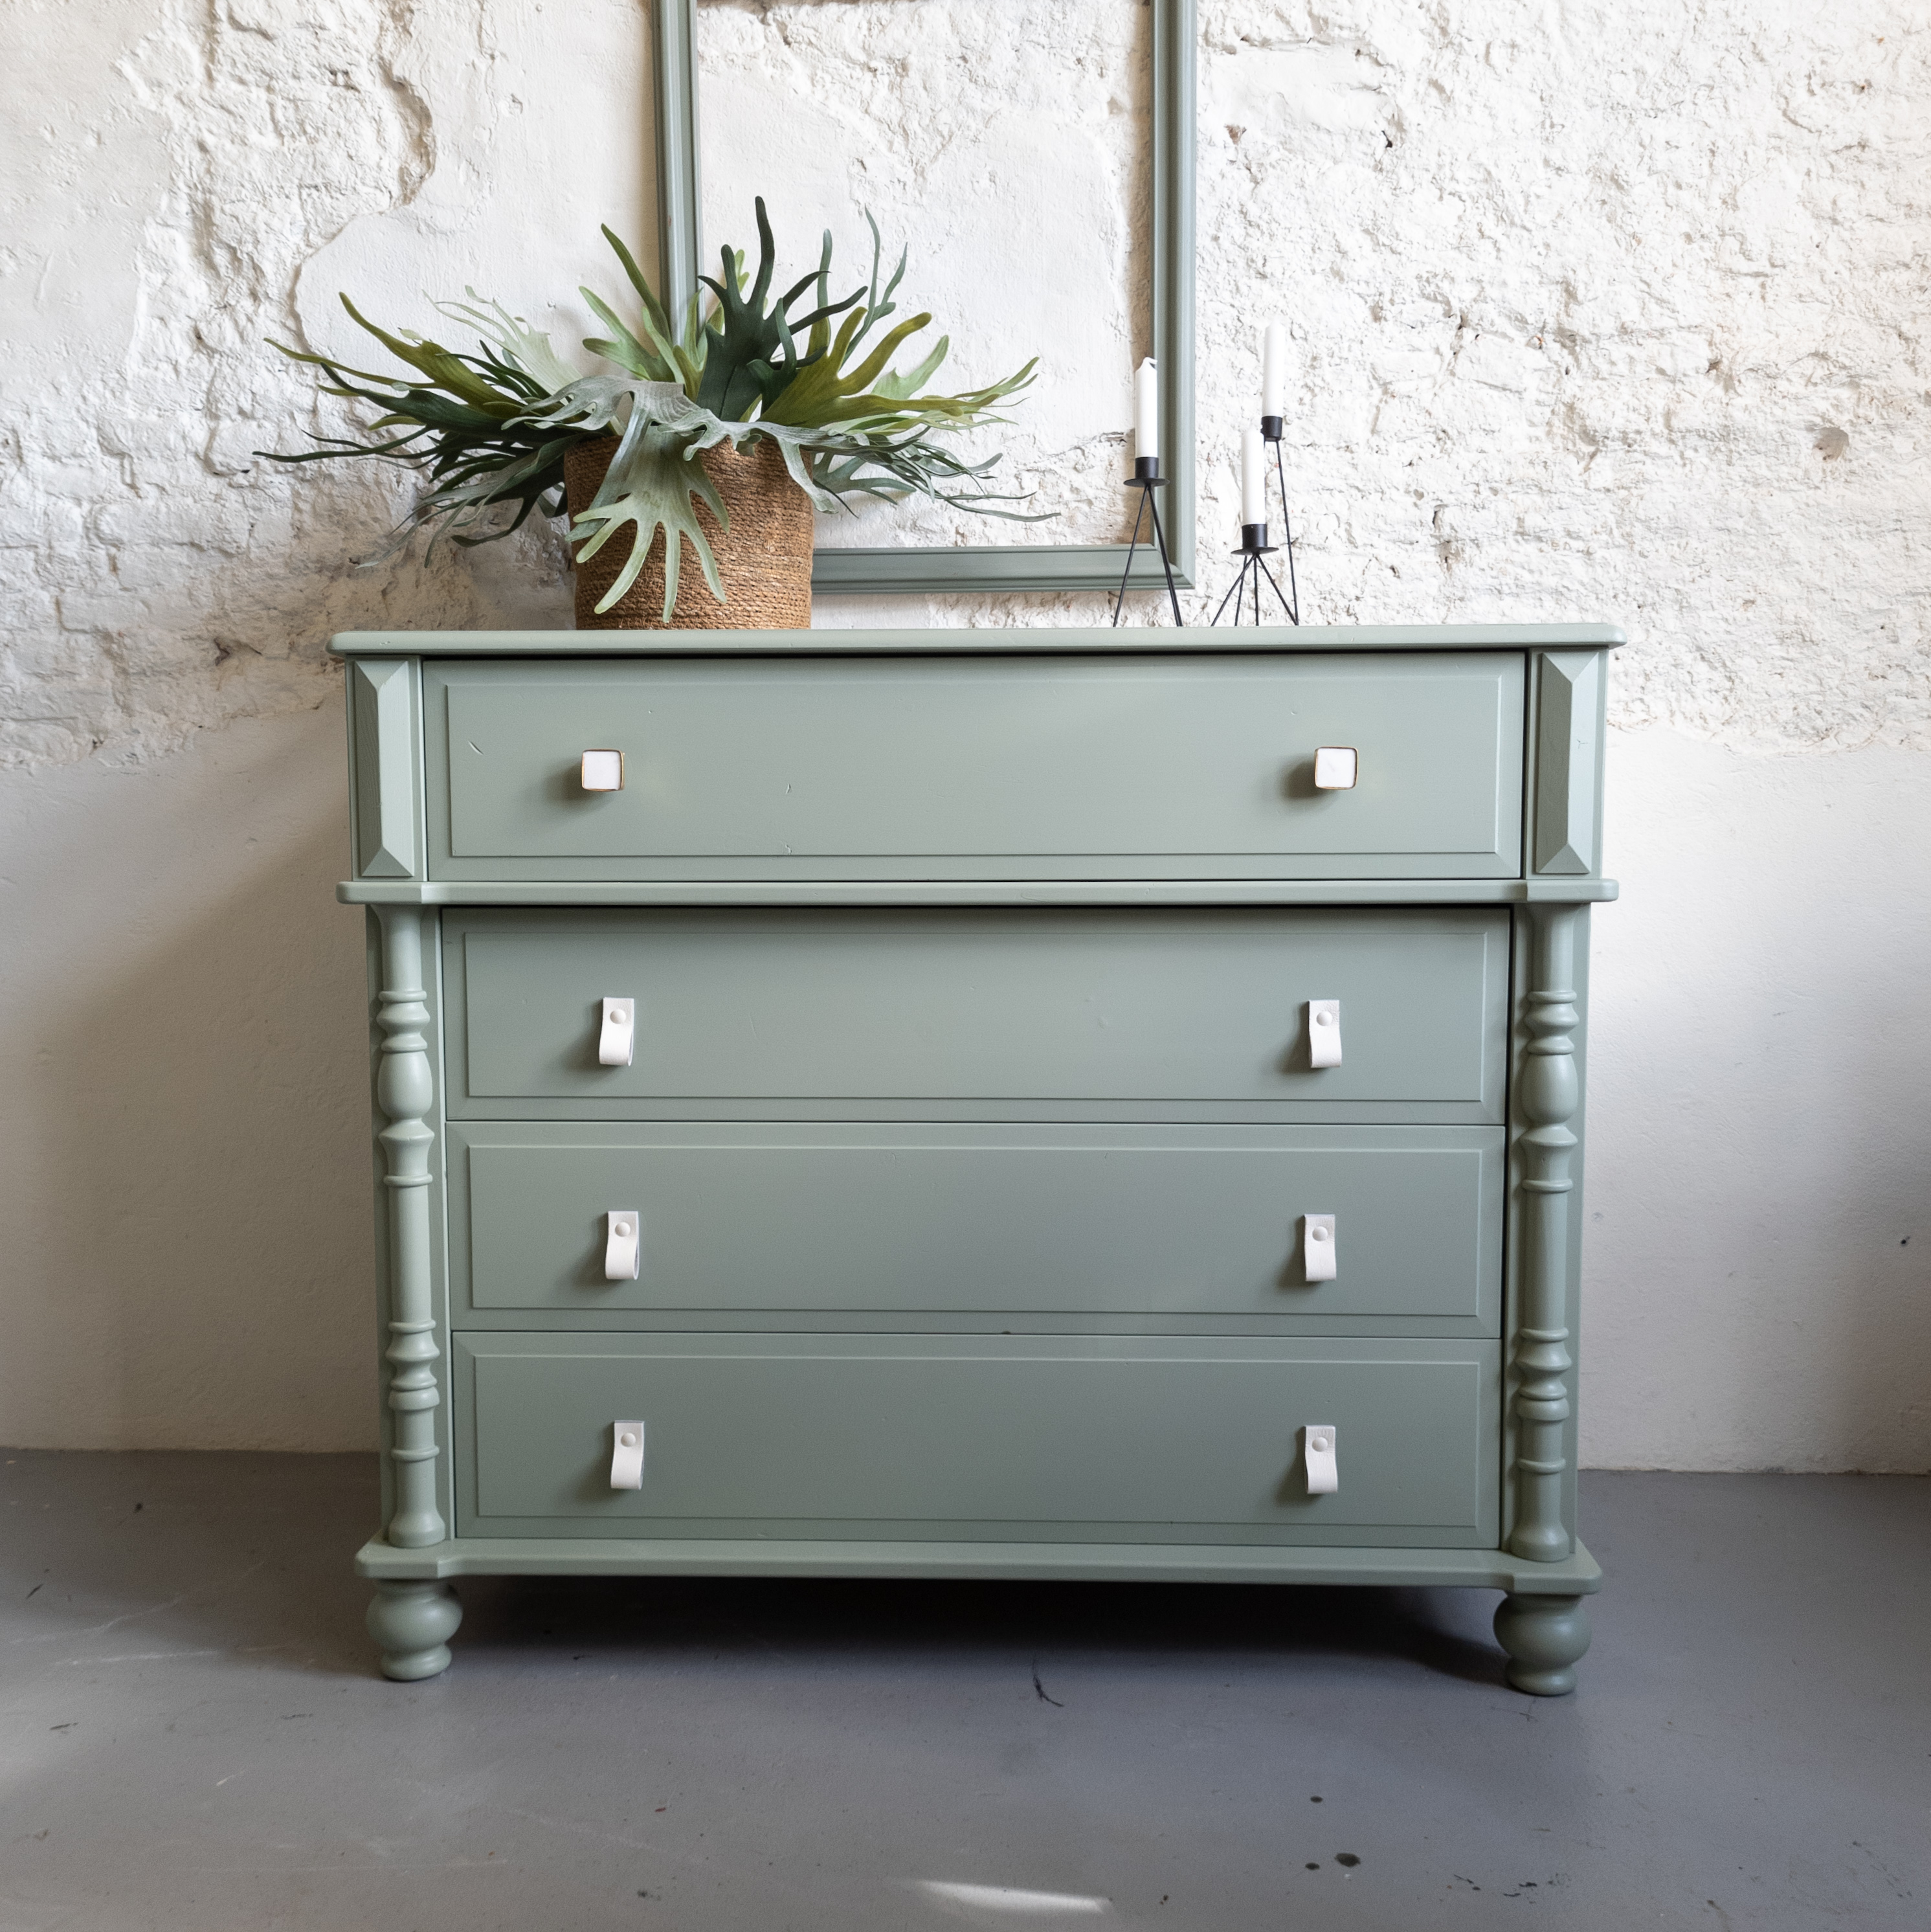 Ladekast oudgroen fusion mineral paint goed gestyled brielle